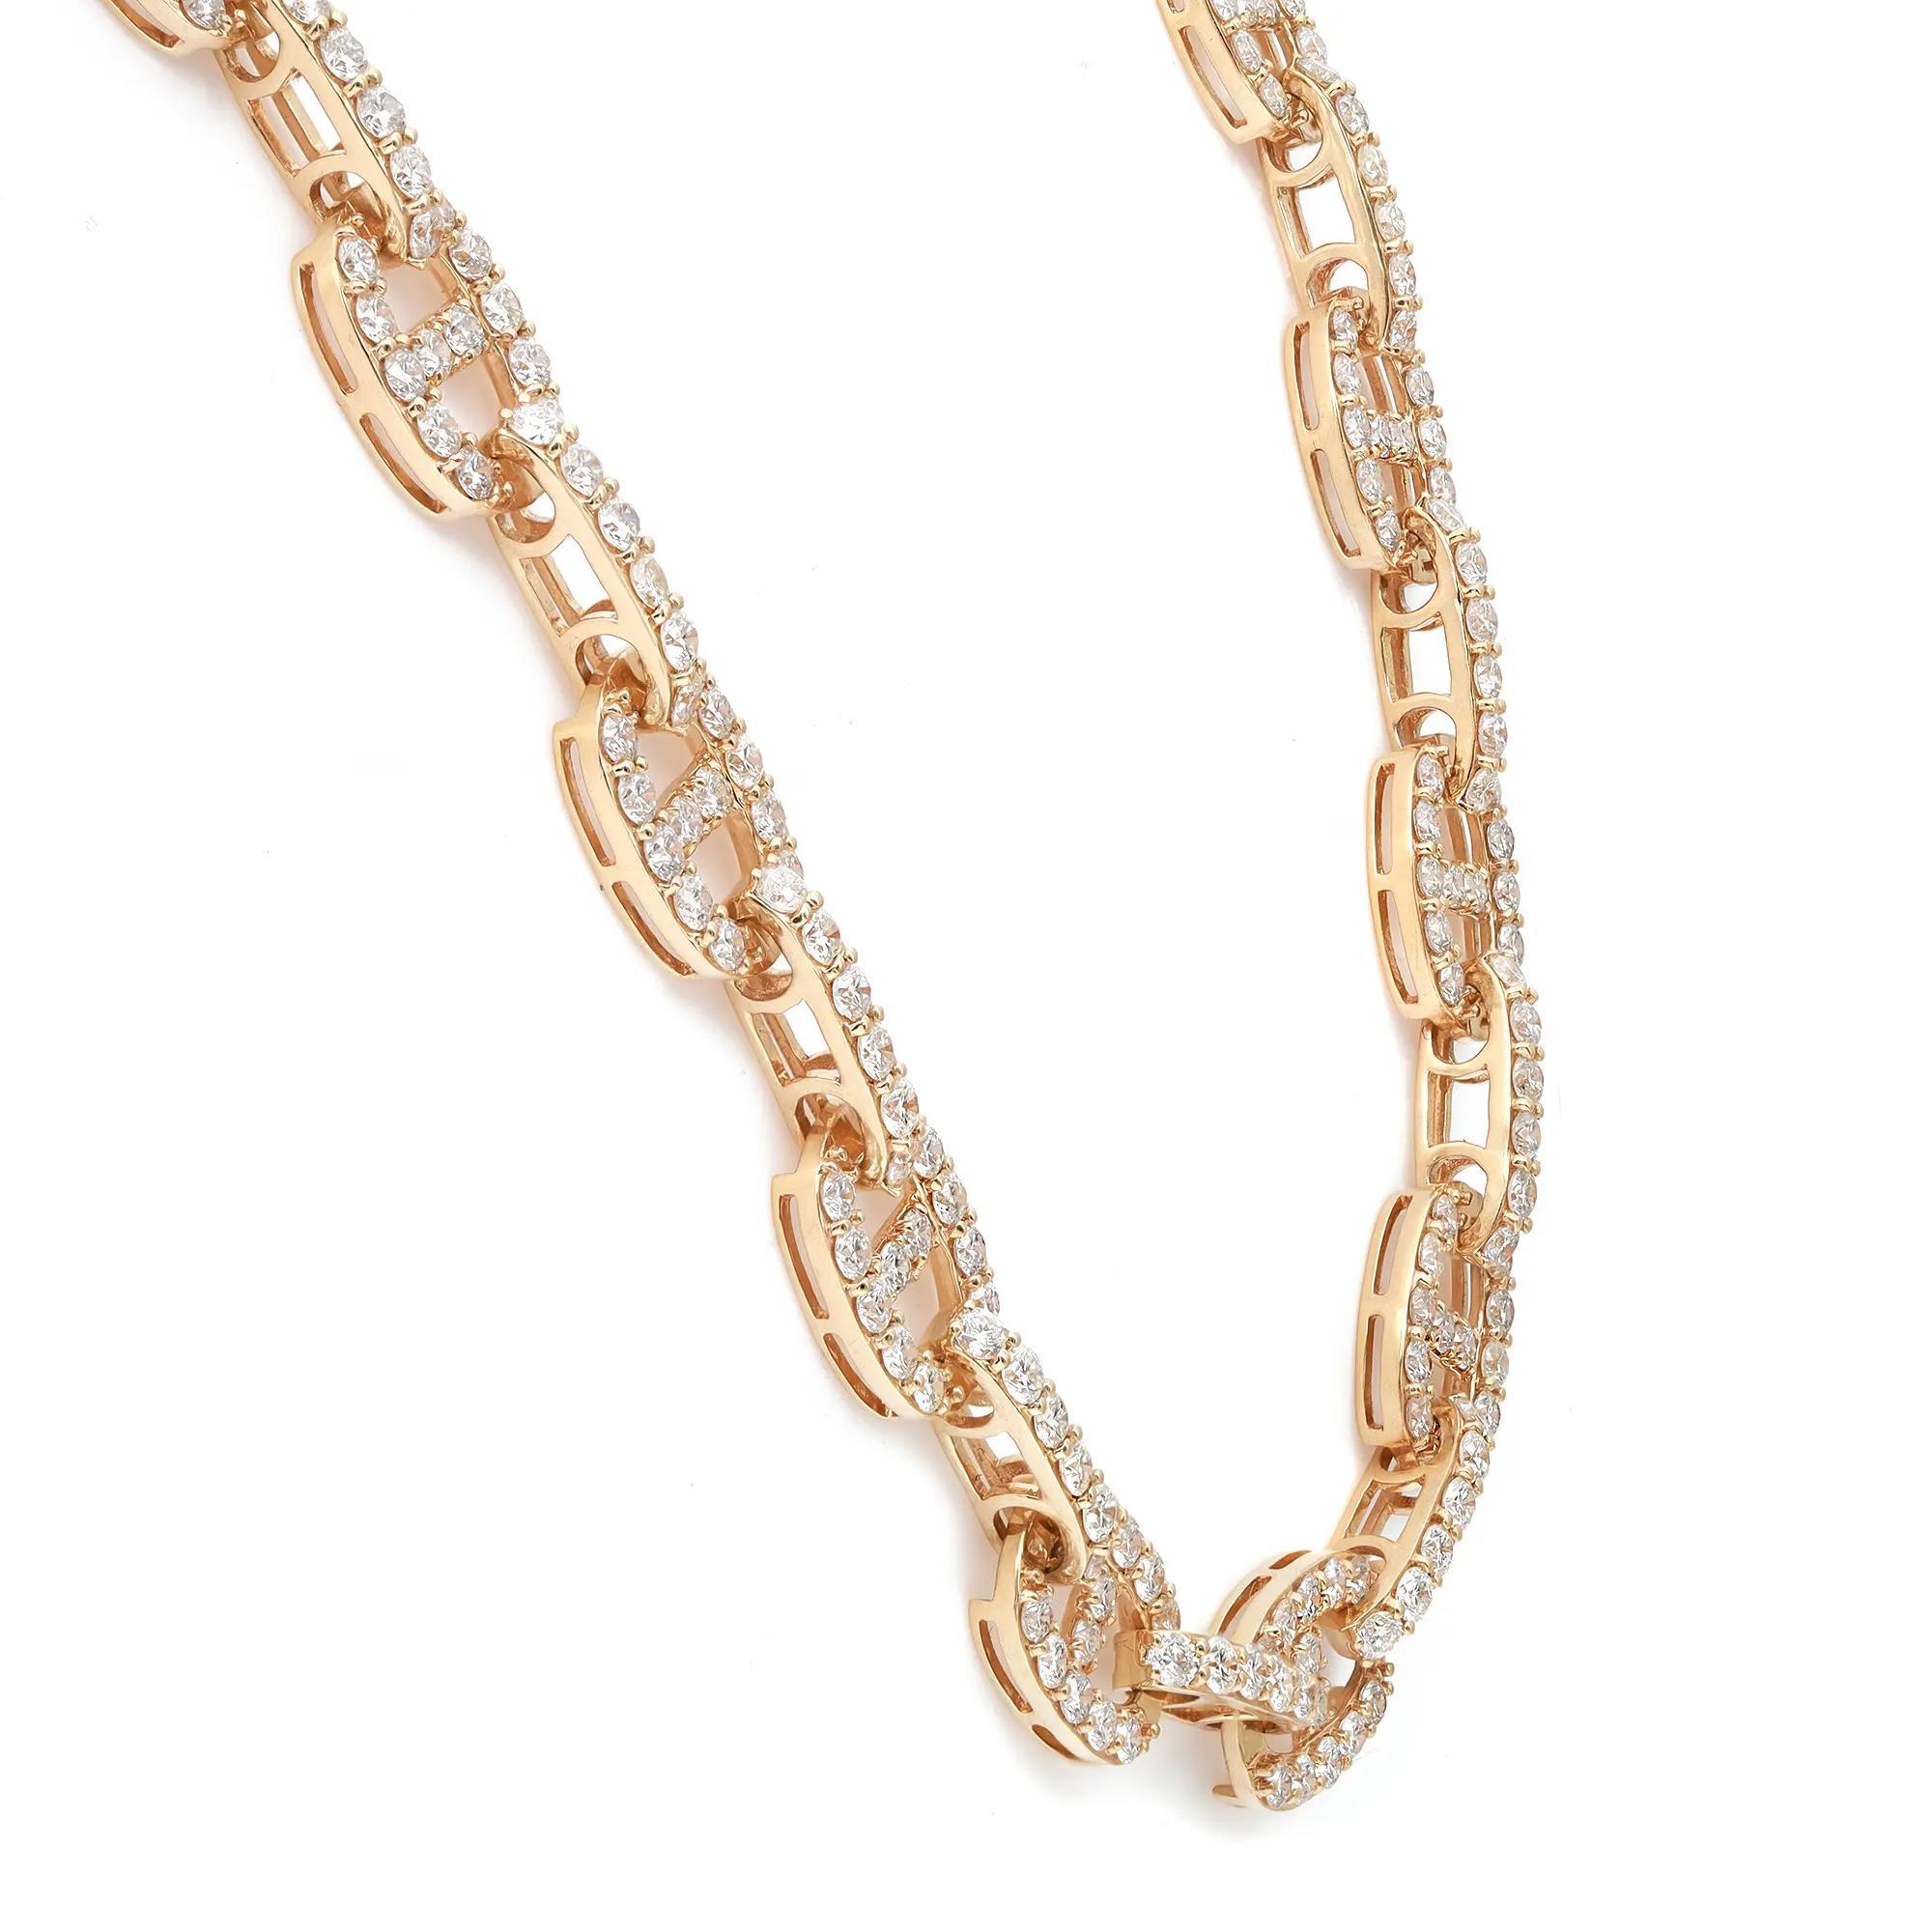 This gorgeous necklace features prong set round brilliant cut diamond studded links crafted in 18K yellow gold. Total diamond weight: 14.95 carats. Diamond quality: color G-H and clarity VS-SI. Necklace length: 17.5 inches. Oval link size: 12.3mm x